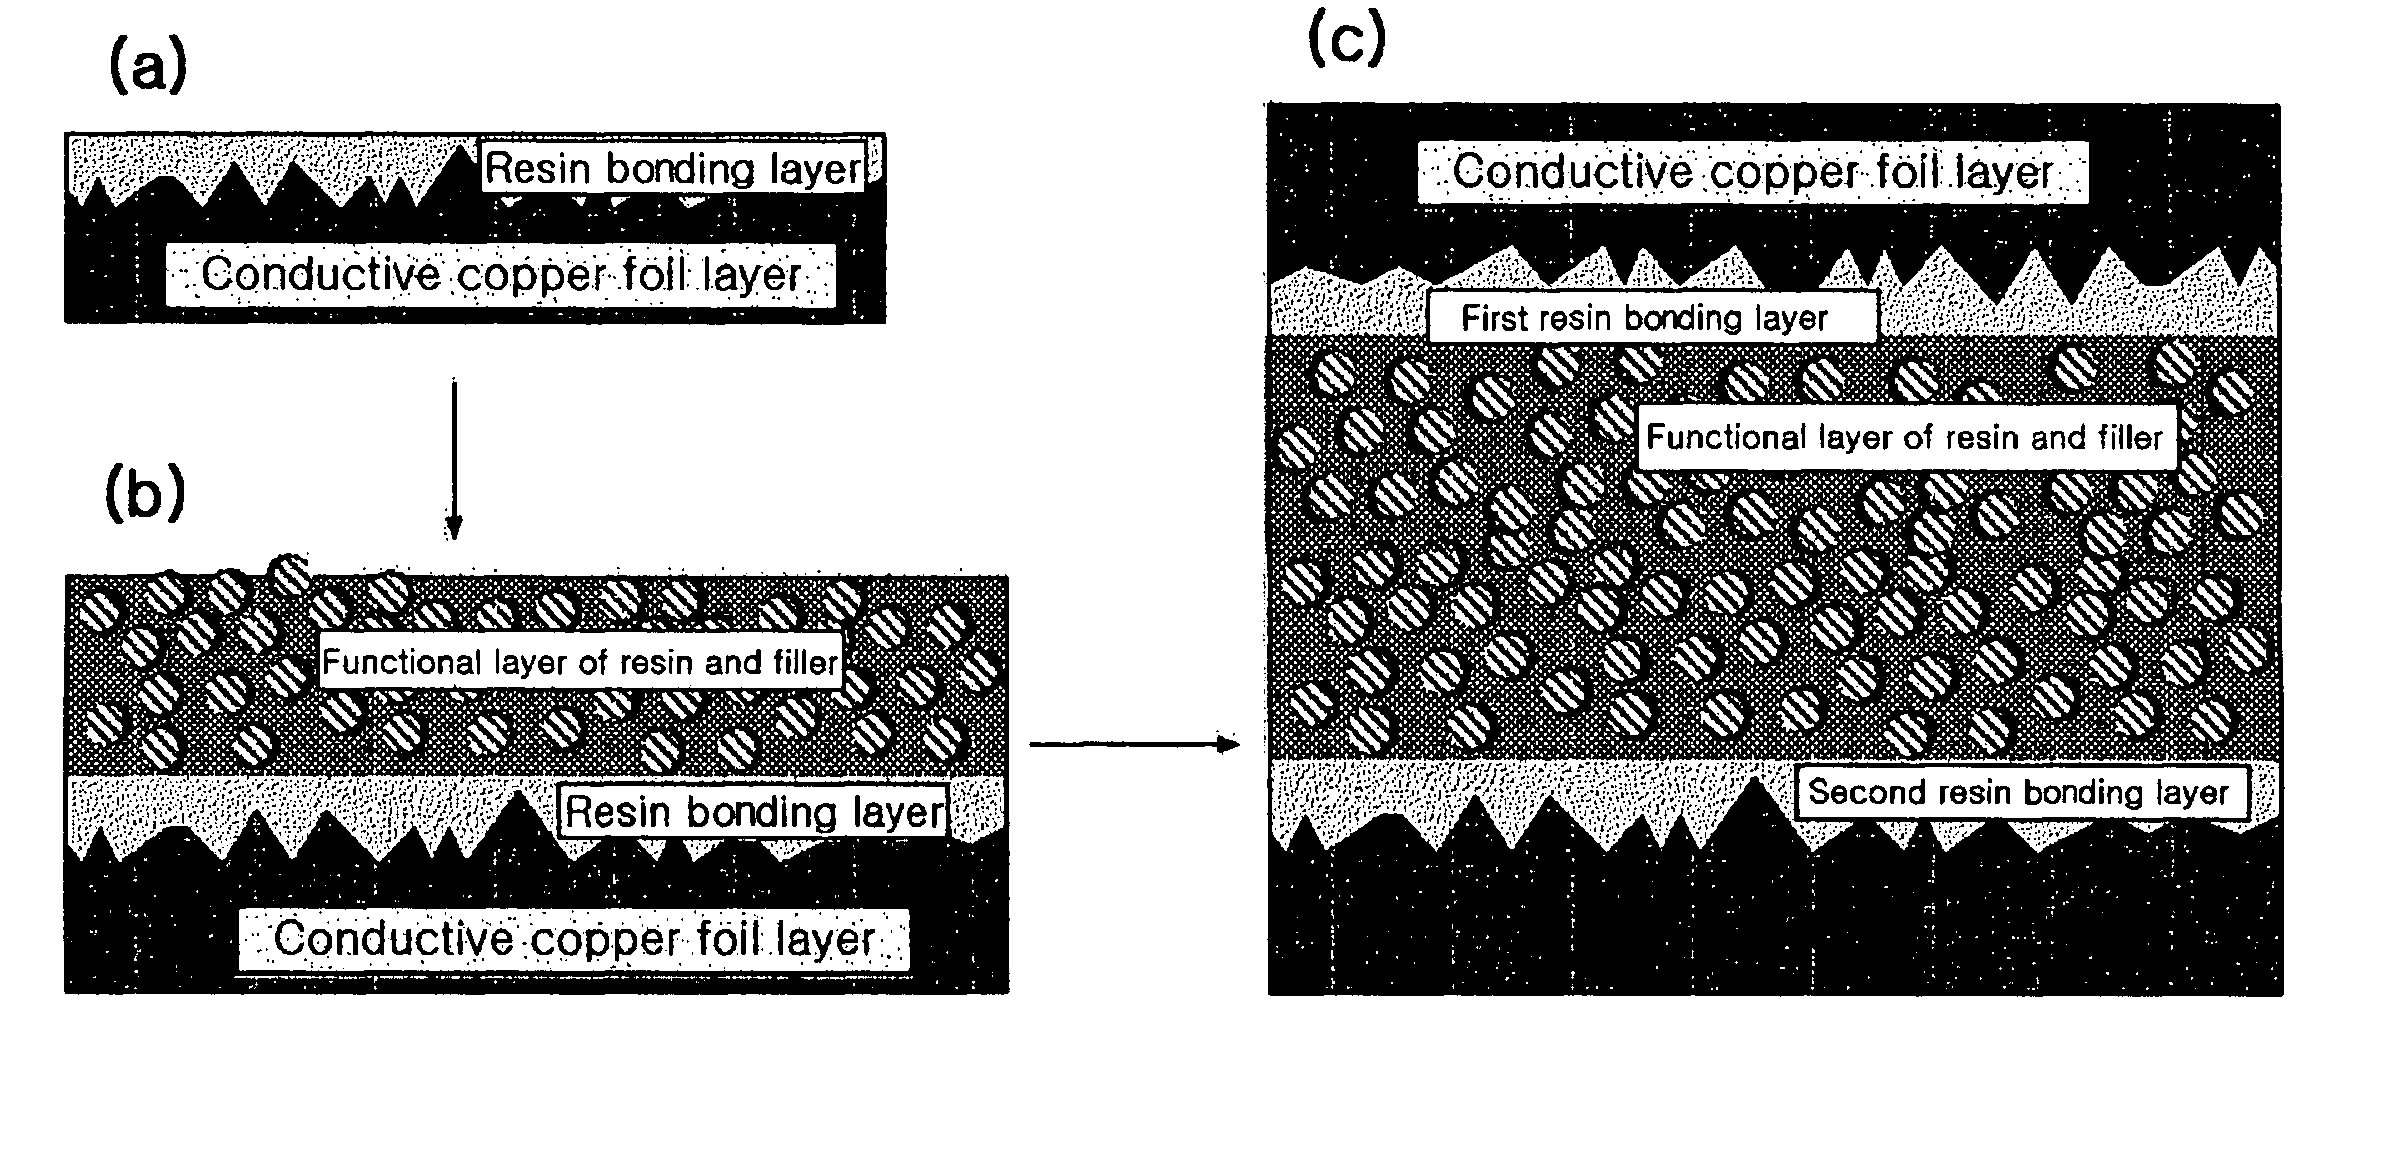 Printed circuit board material for embedded passive devices